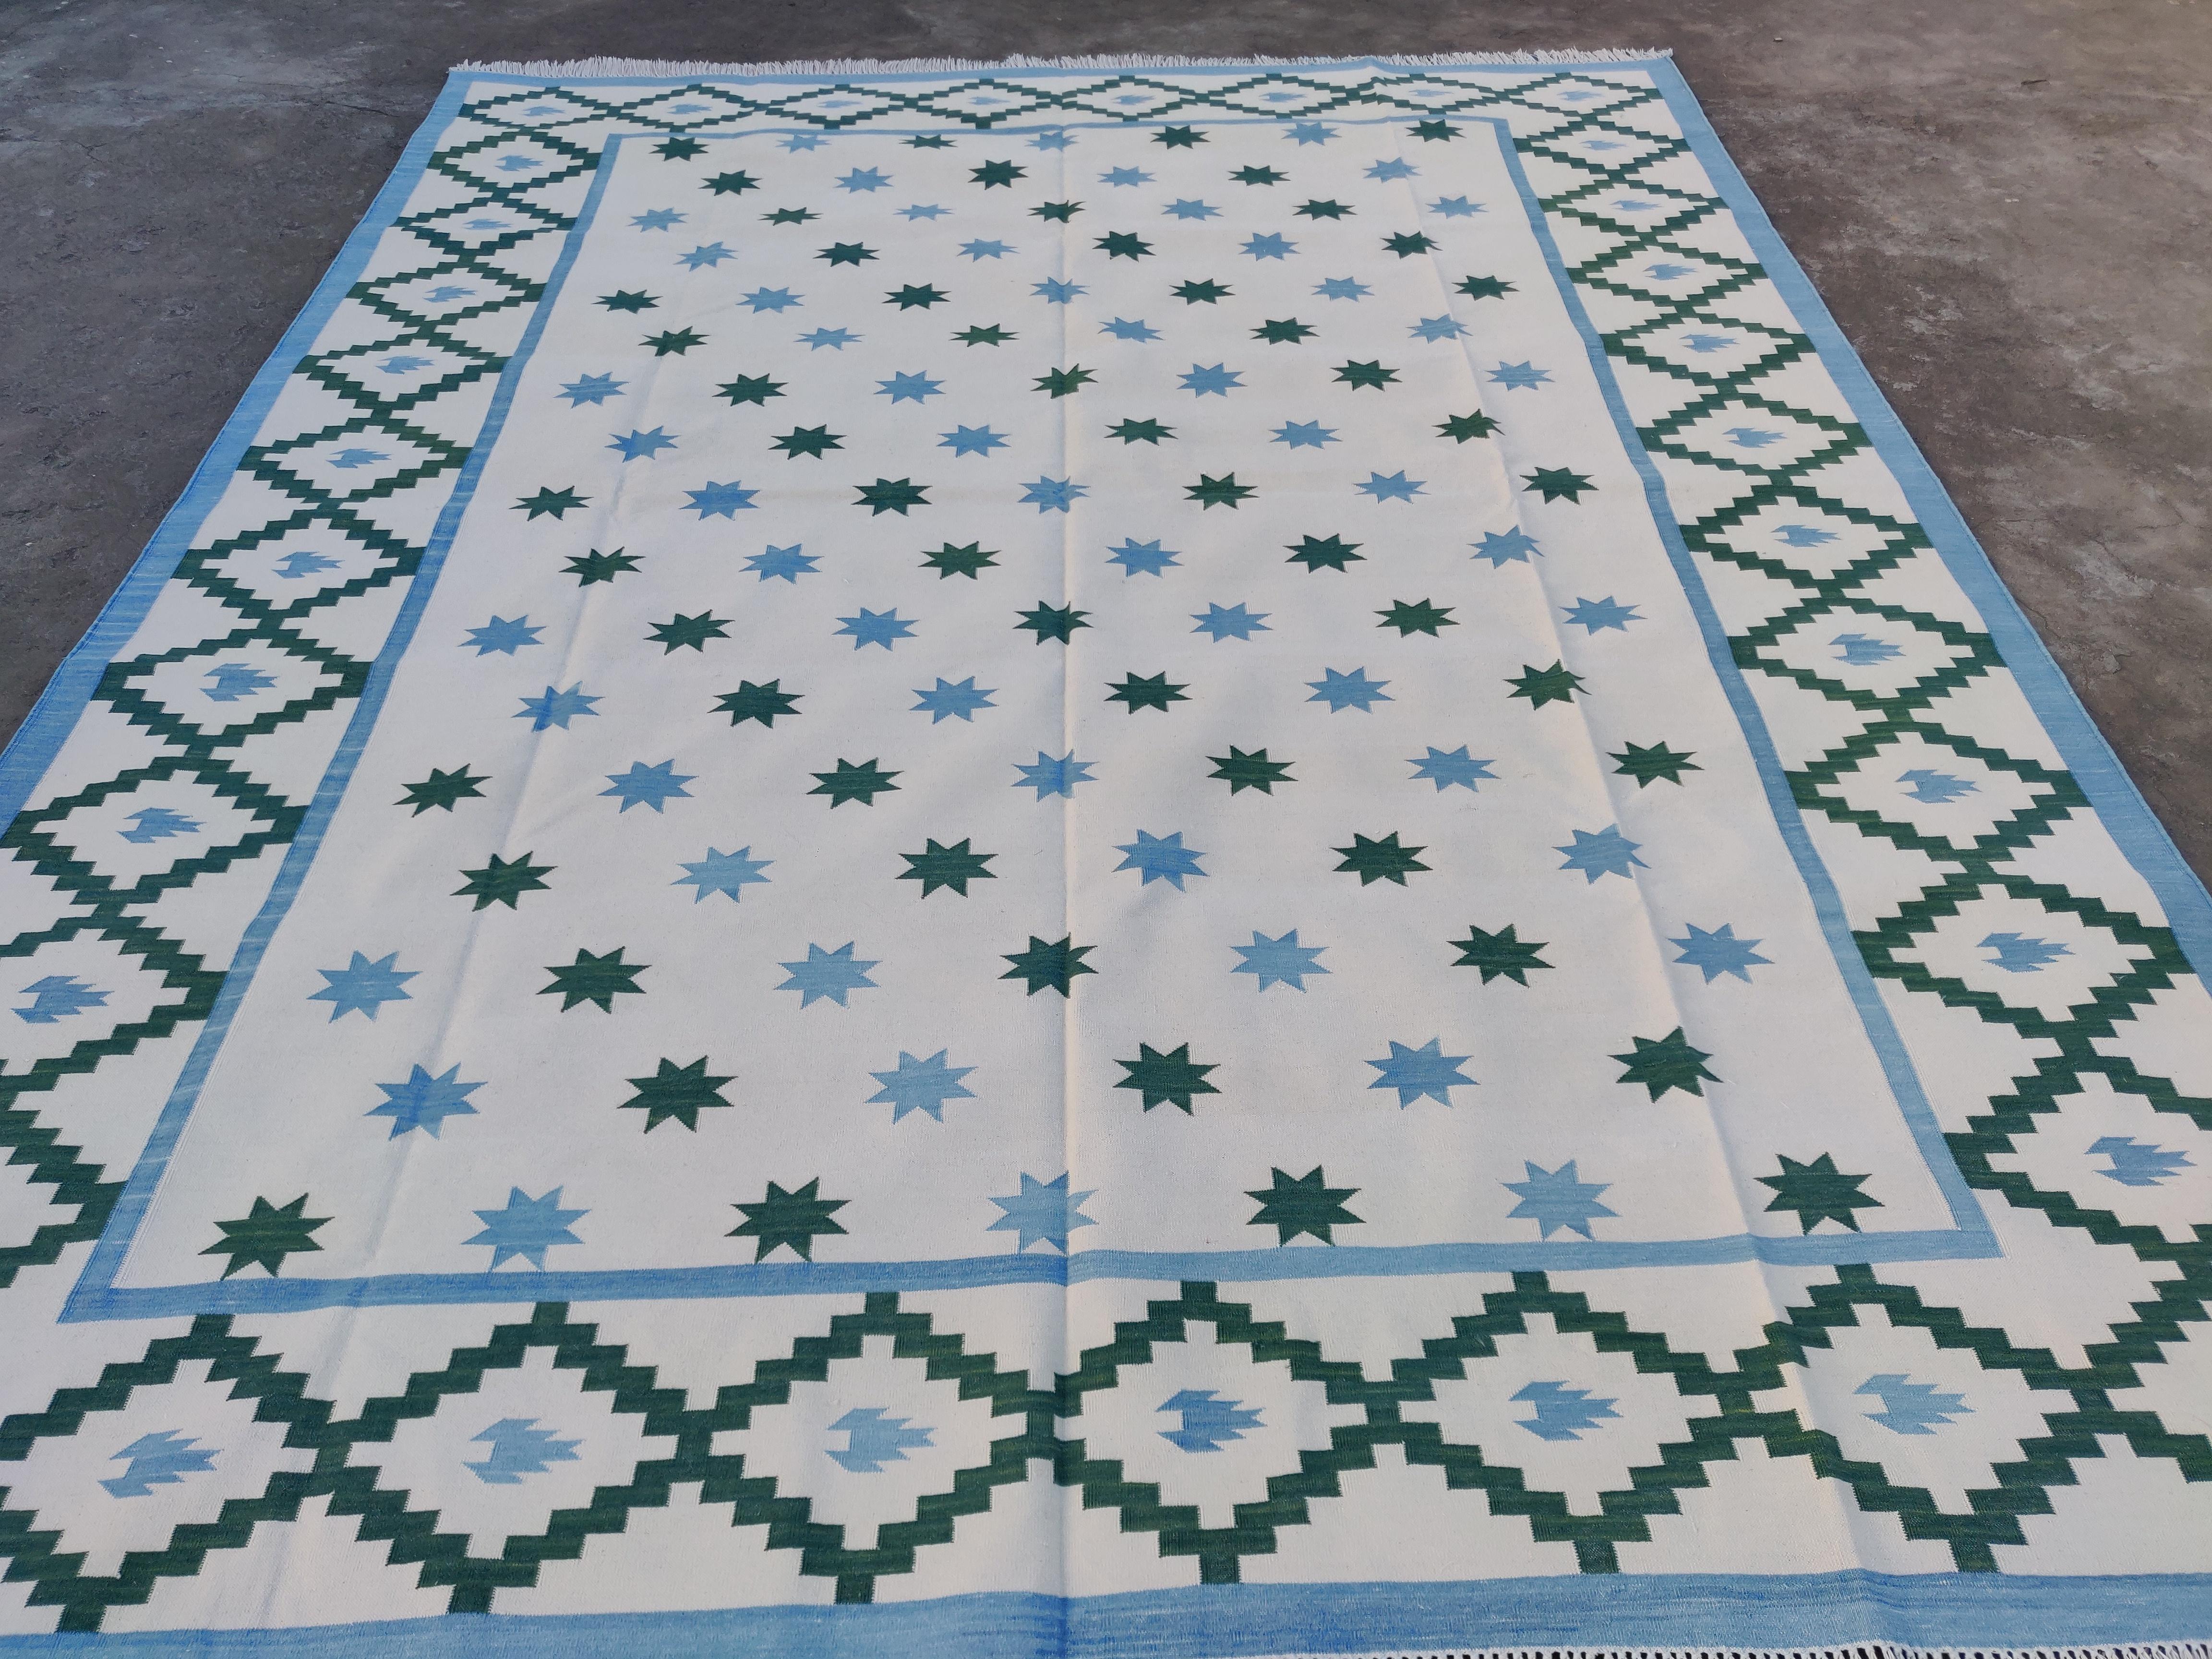 Hand-Woven Handmade Cotton Area Flat Weave Rug, Cream & Blue Star Patterned Indian Dhurrie For Sale